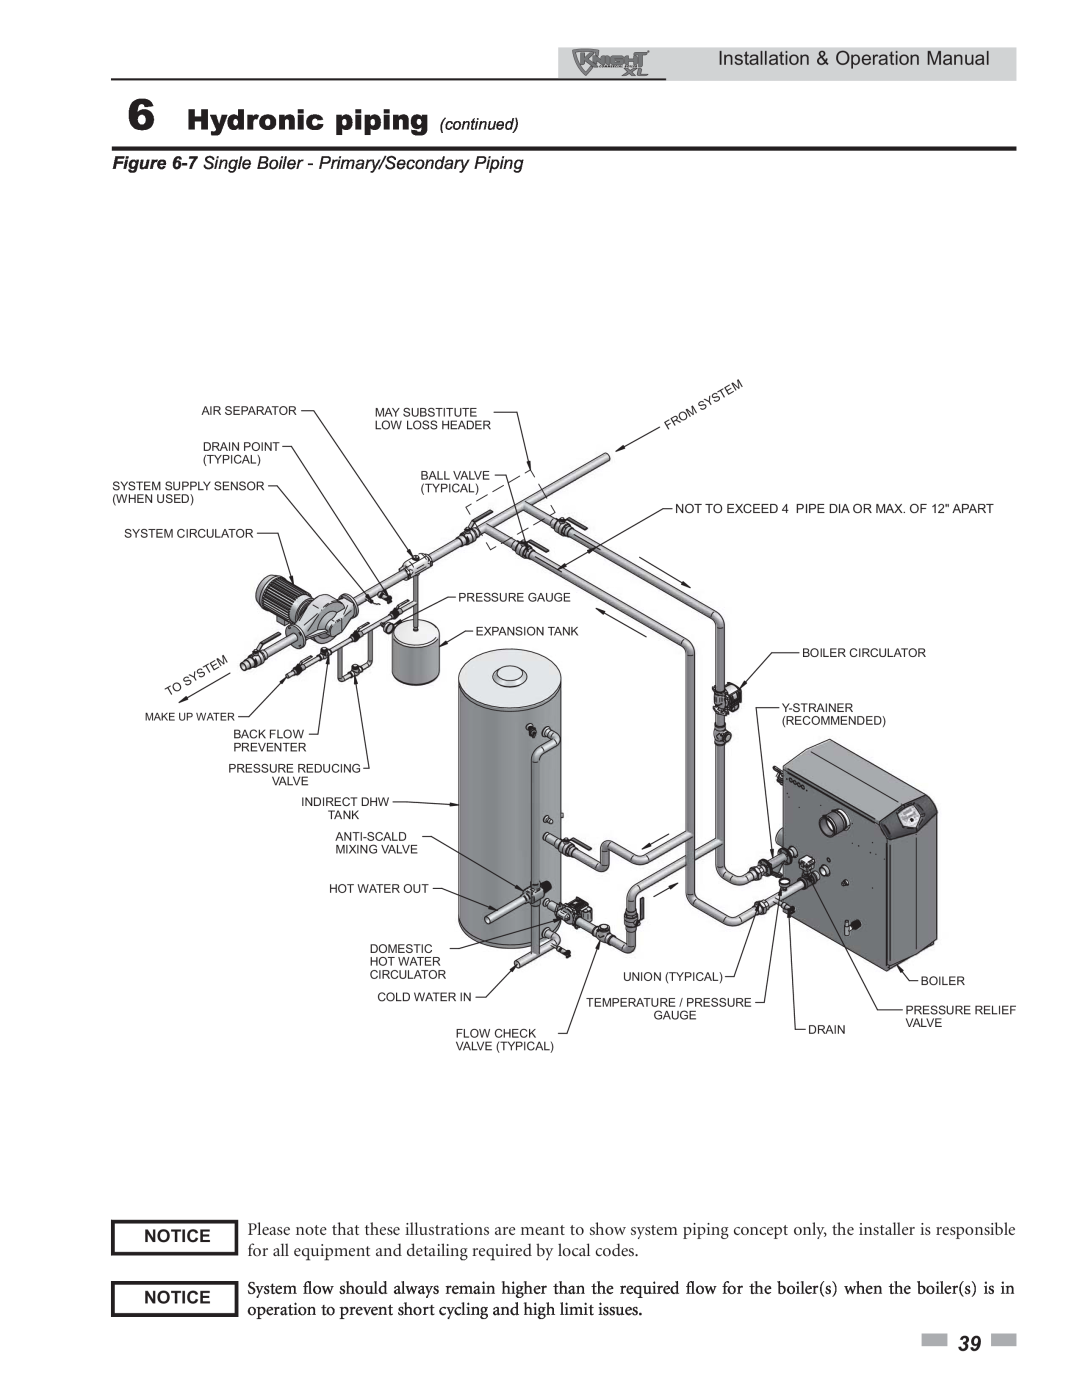 Lochinvar 399 operation manual 6Hydronic piping continued, Installation & Operation Manual, Notice Notice 